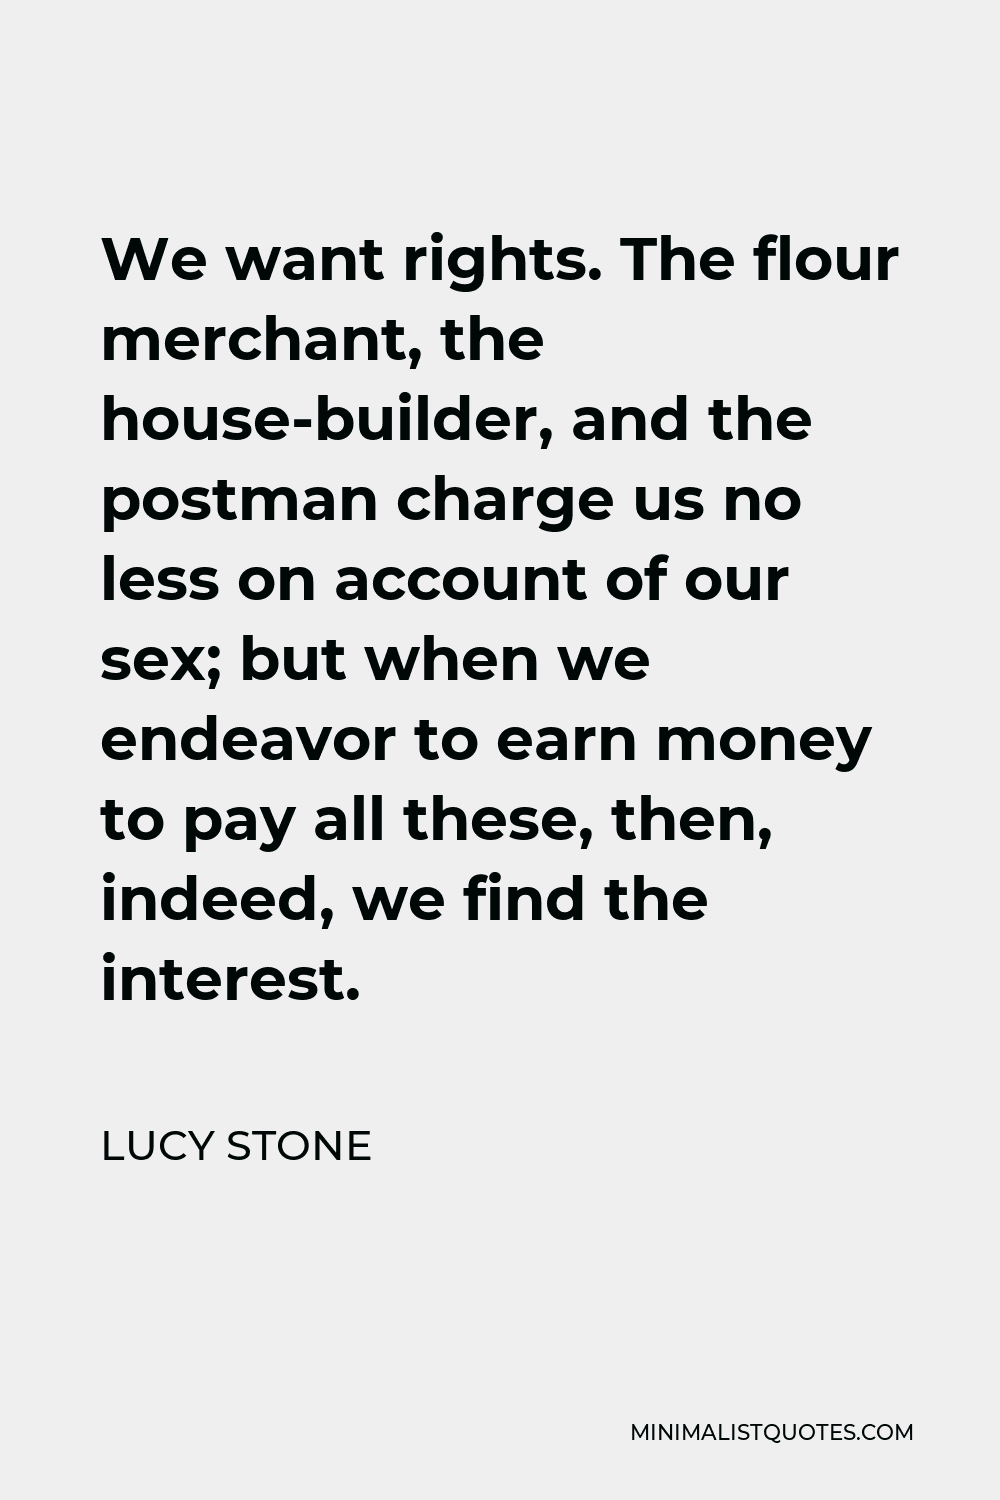 Lucy Stone Quote - We want rights. The flour merchant, the house-builder, and the postman charge us no less on account of our sex; but when we endeavor to earn money to pay all these, then, indeed, we find the interest.